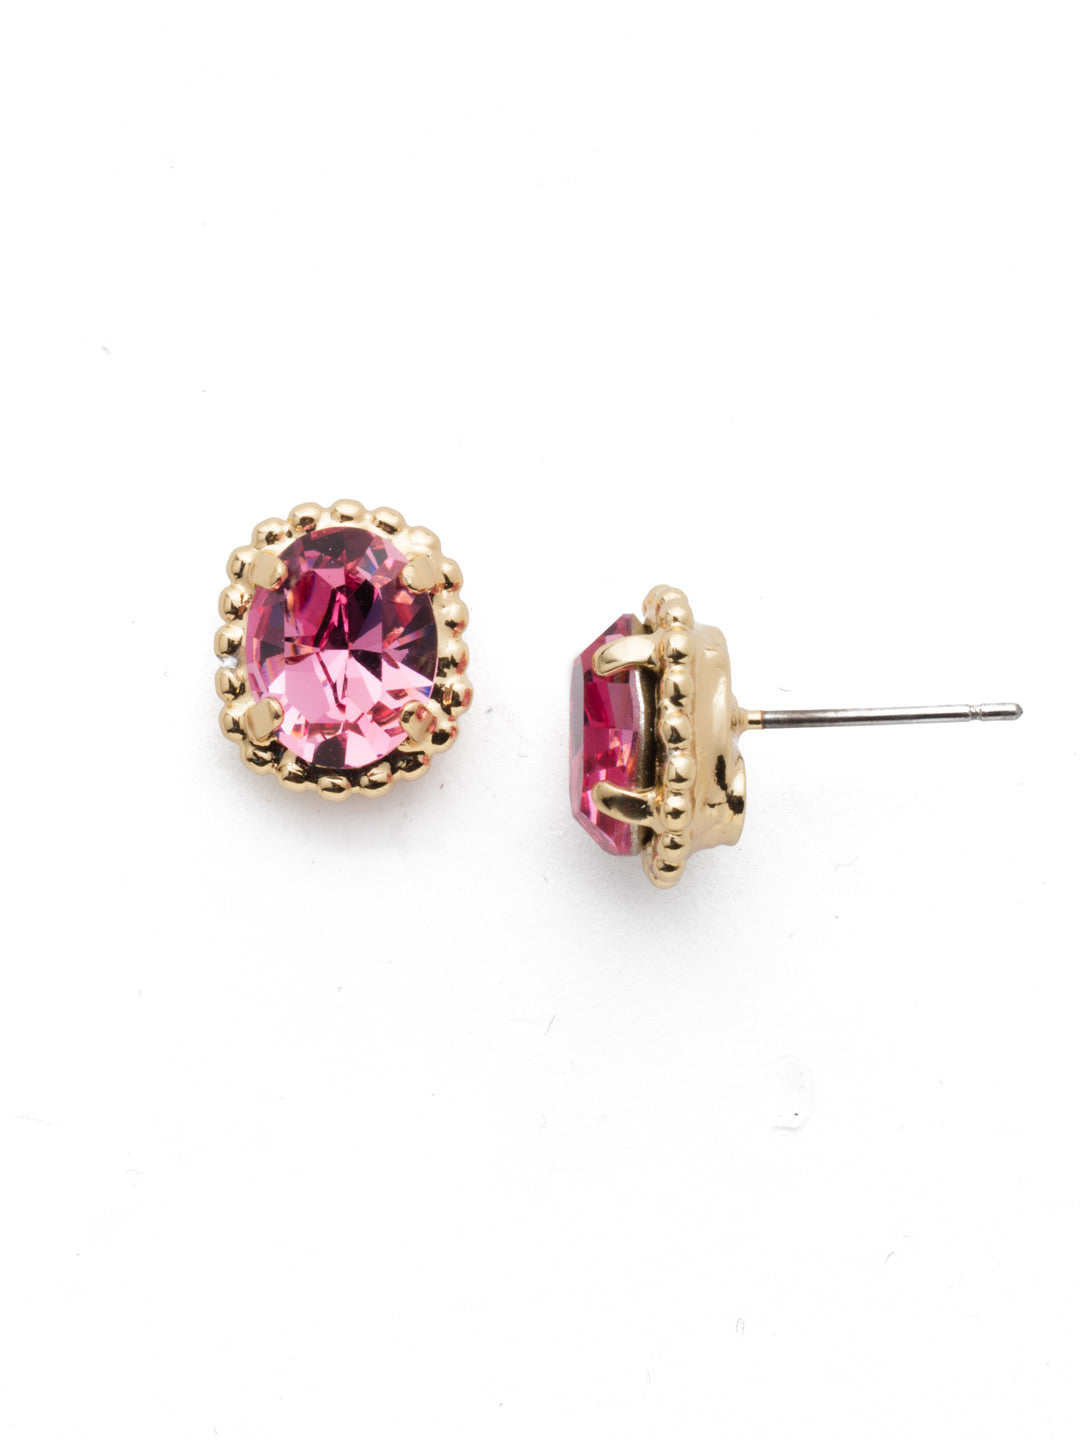 Oval-Cut Solitaire Stud Earrings - EDQ10BGBGA - These simple stud earrings feature a beautiful oval crystal surrounded by a decorative edged border. From Sorrelli's Begonia collection in our Bright Gold-tone finish.